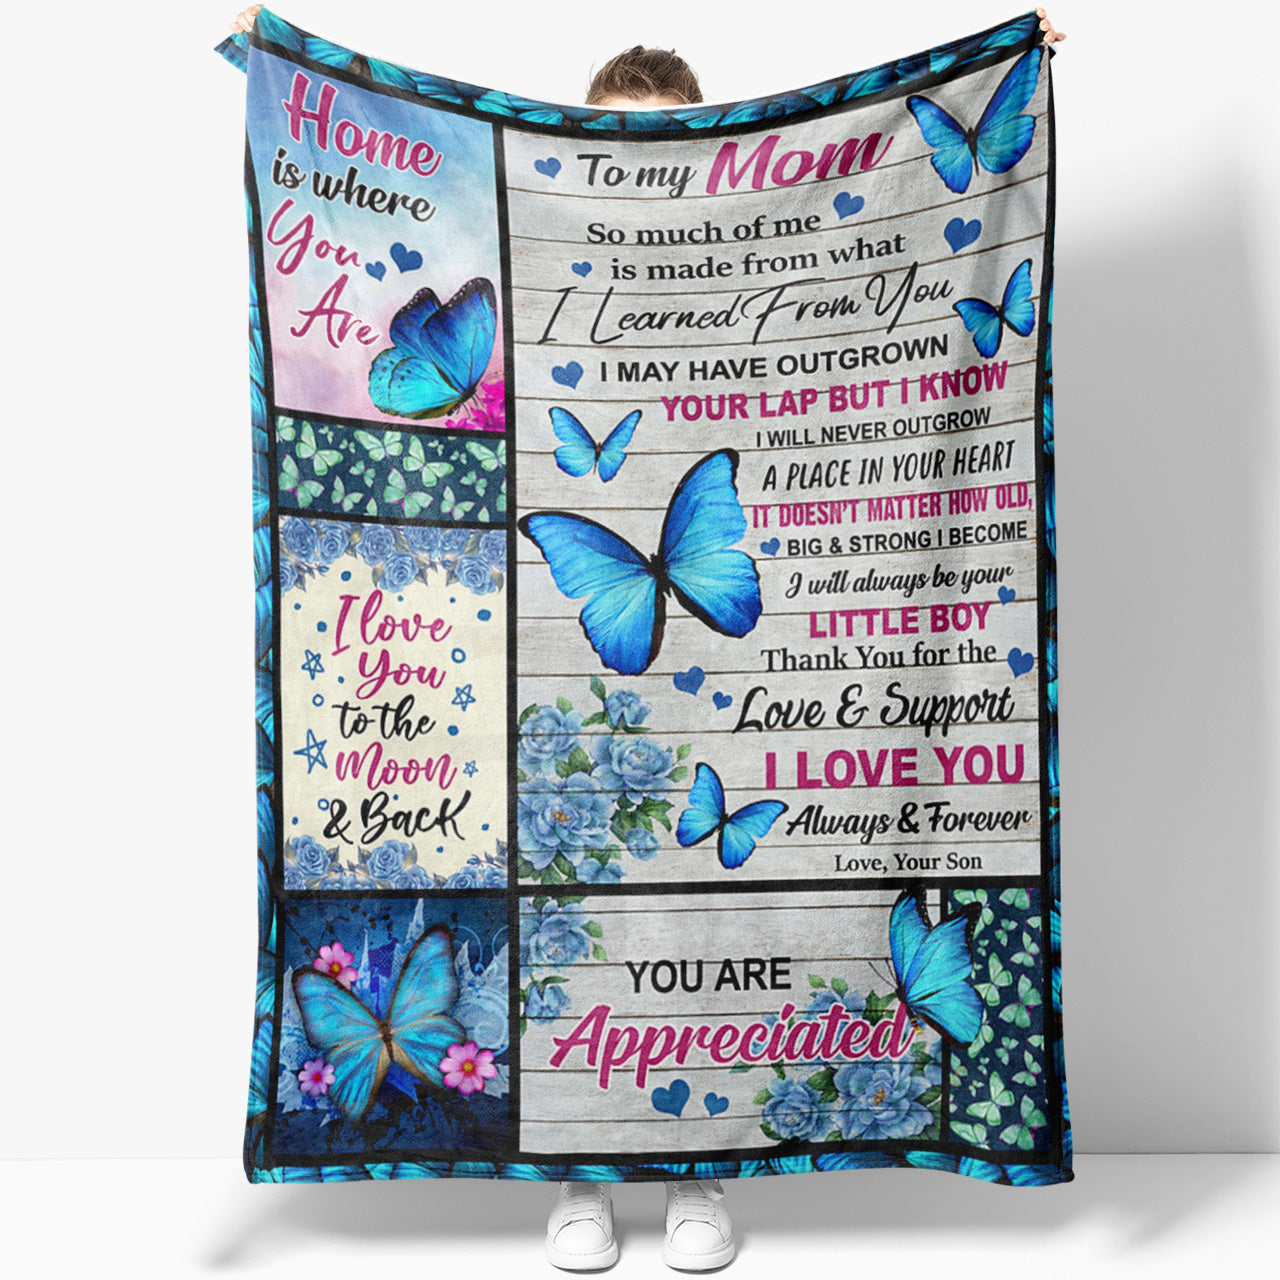 Gifts for Mom, Mom Birthday Gifts, Christ-mas Gifts for Mom from Daughter, Mom Gifts, I Love You Mom Blanket Gifts for Mom, Gift for Mom from Son